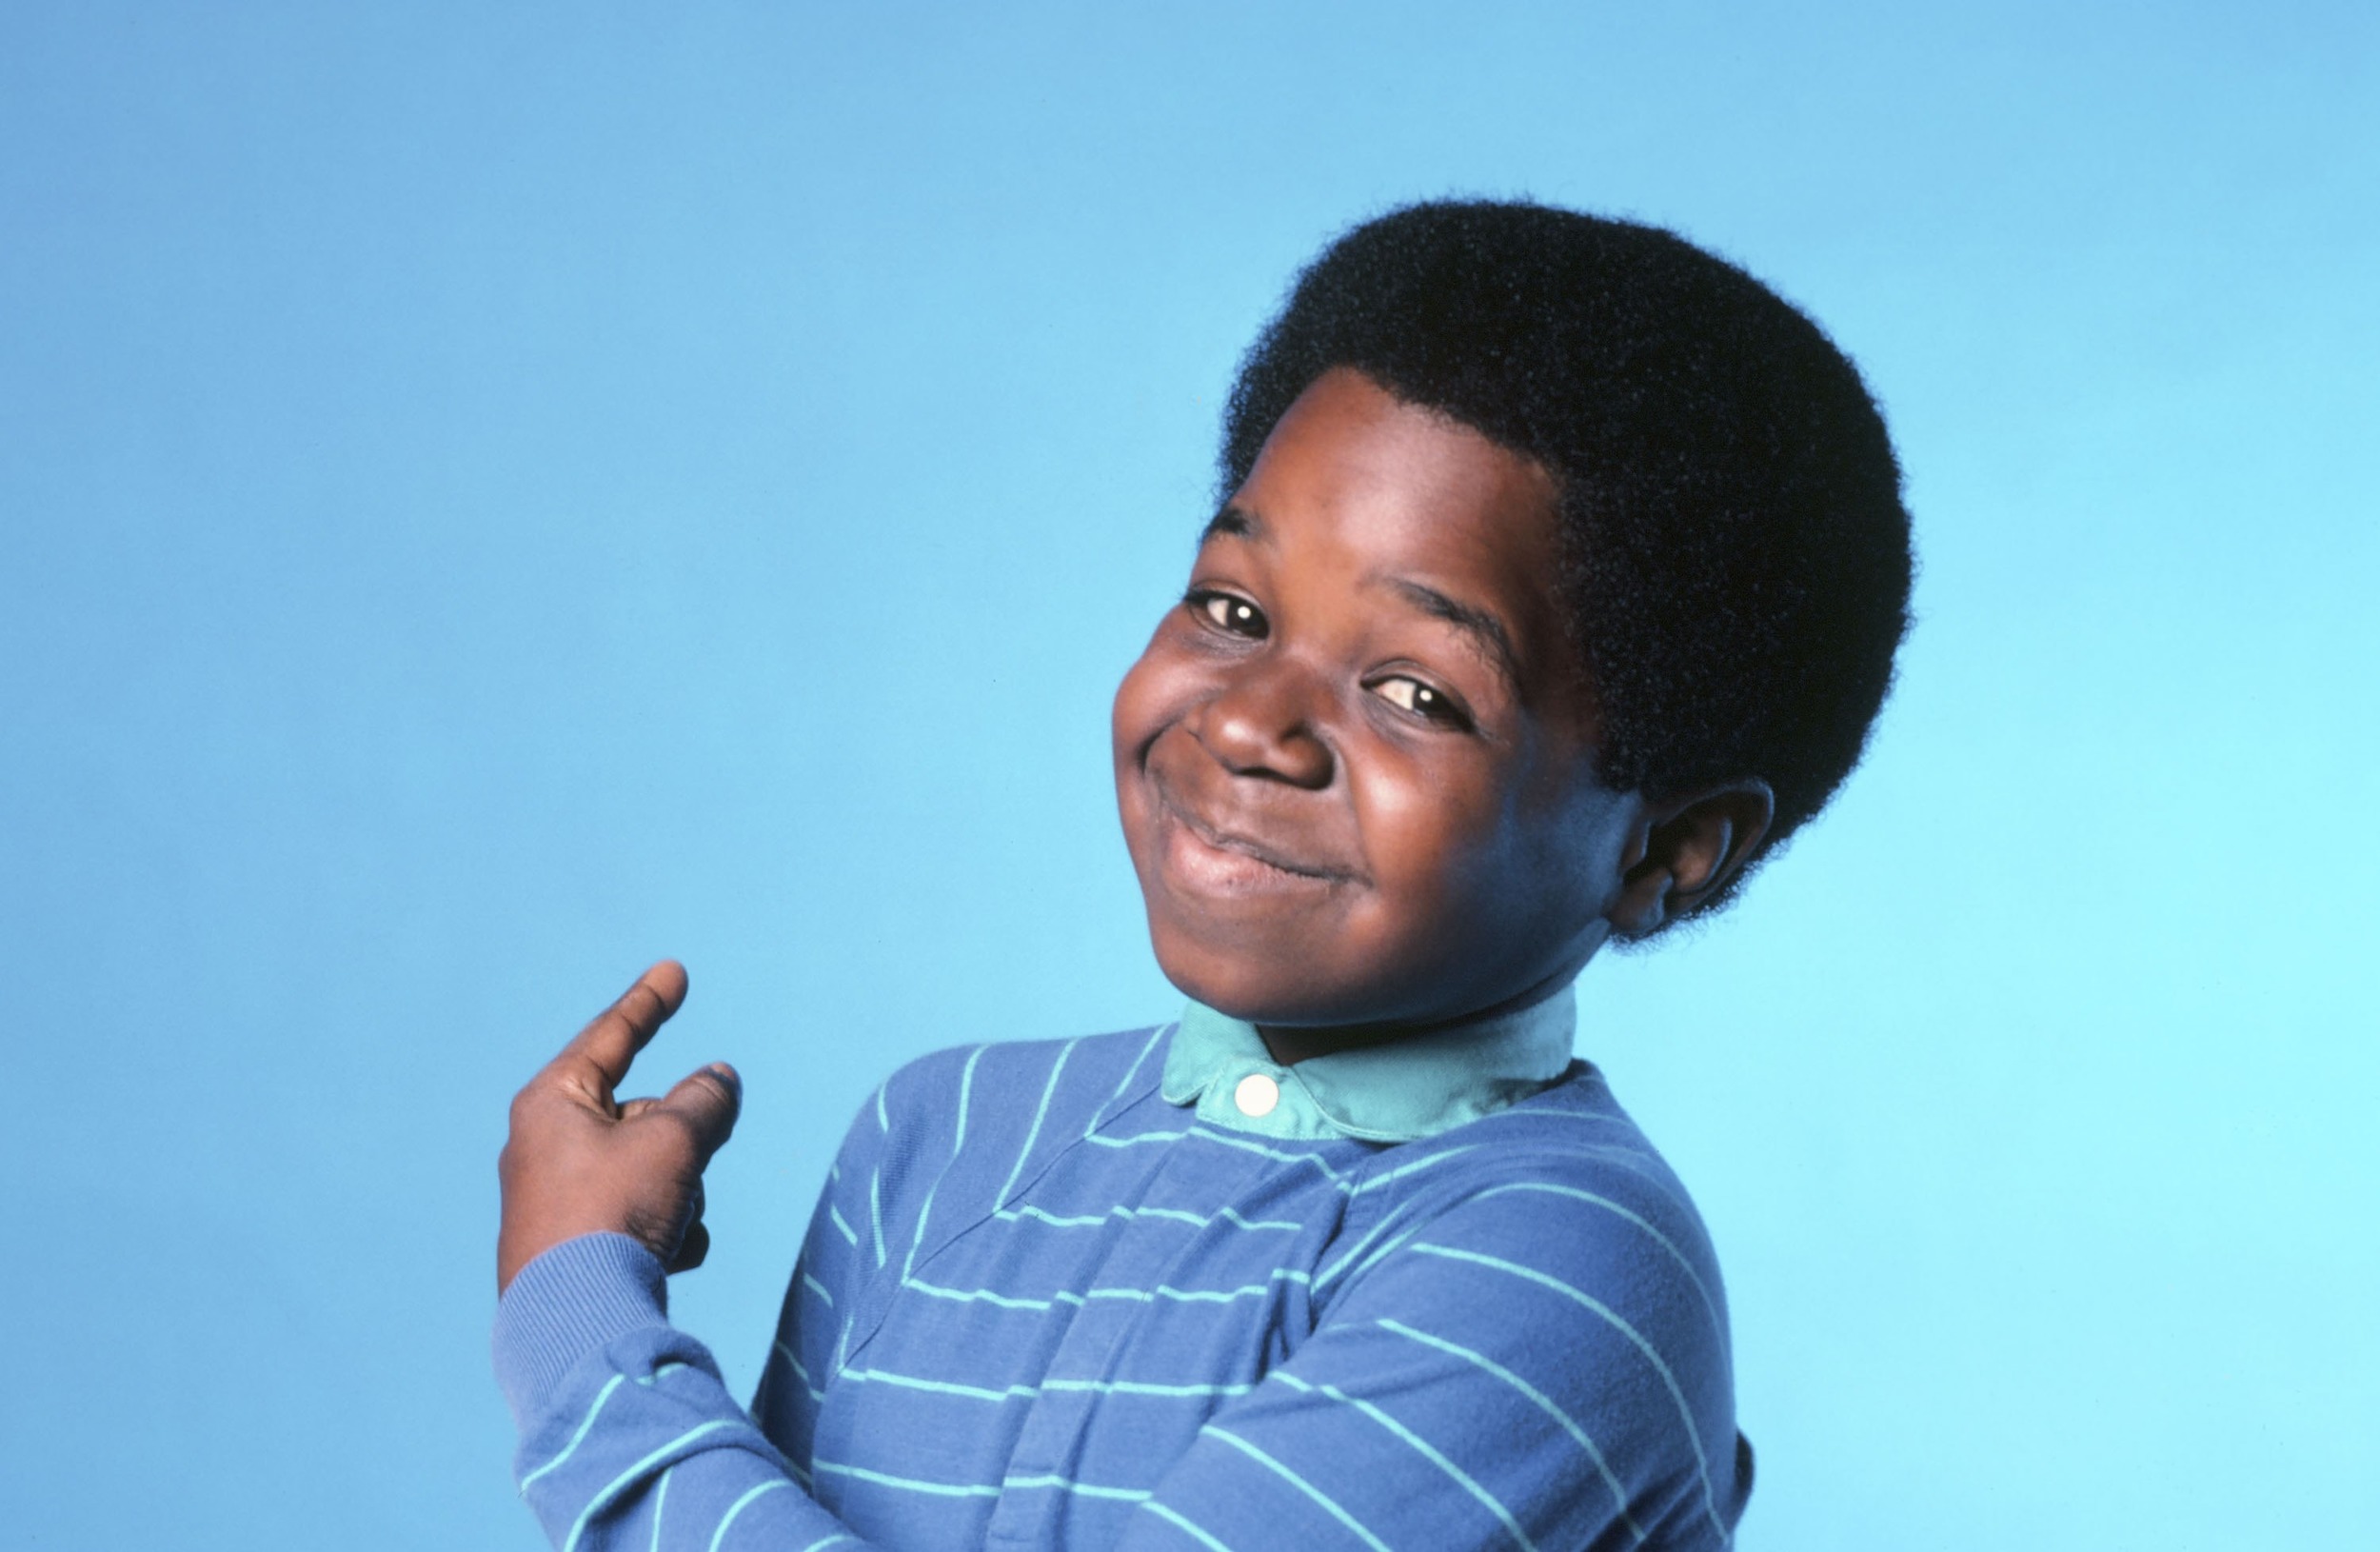 Pictures of Gary Coleman, Picture #168635 - Pictures Of Celebrities2500 x 1630